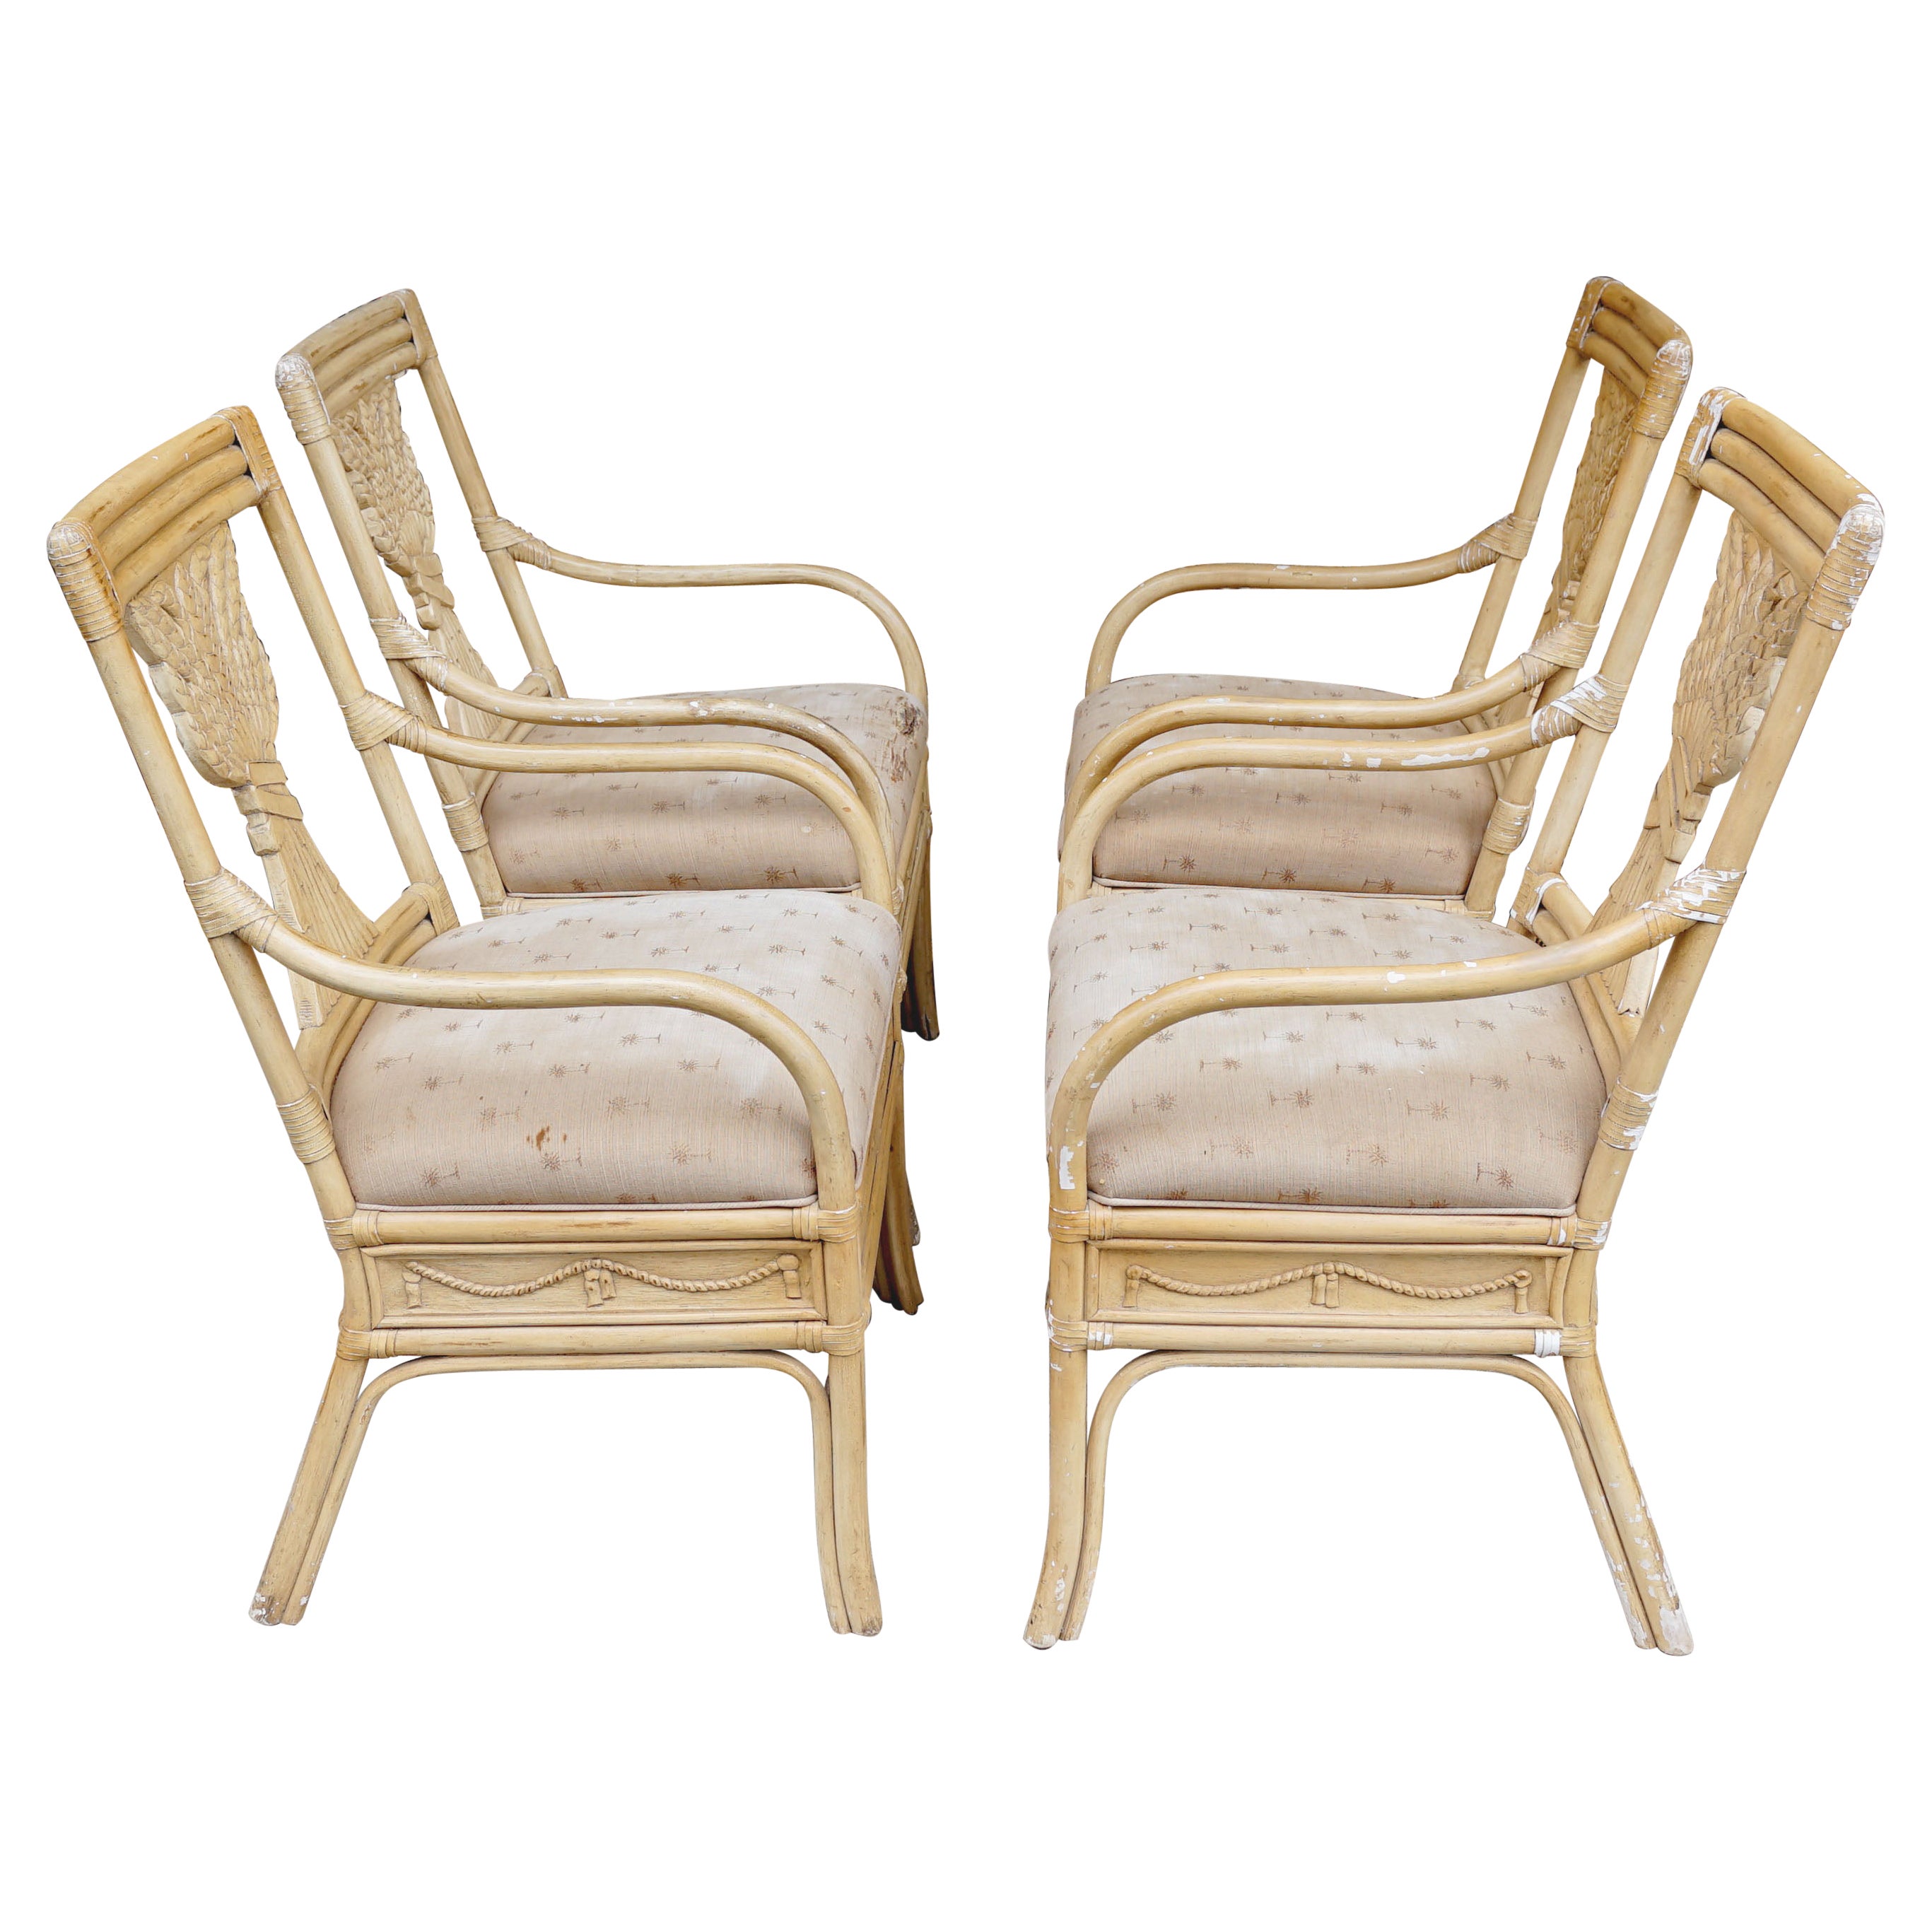 Set of Four Neo Classical 1930s Armchairs of Bamboo and Rattan in Beige